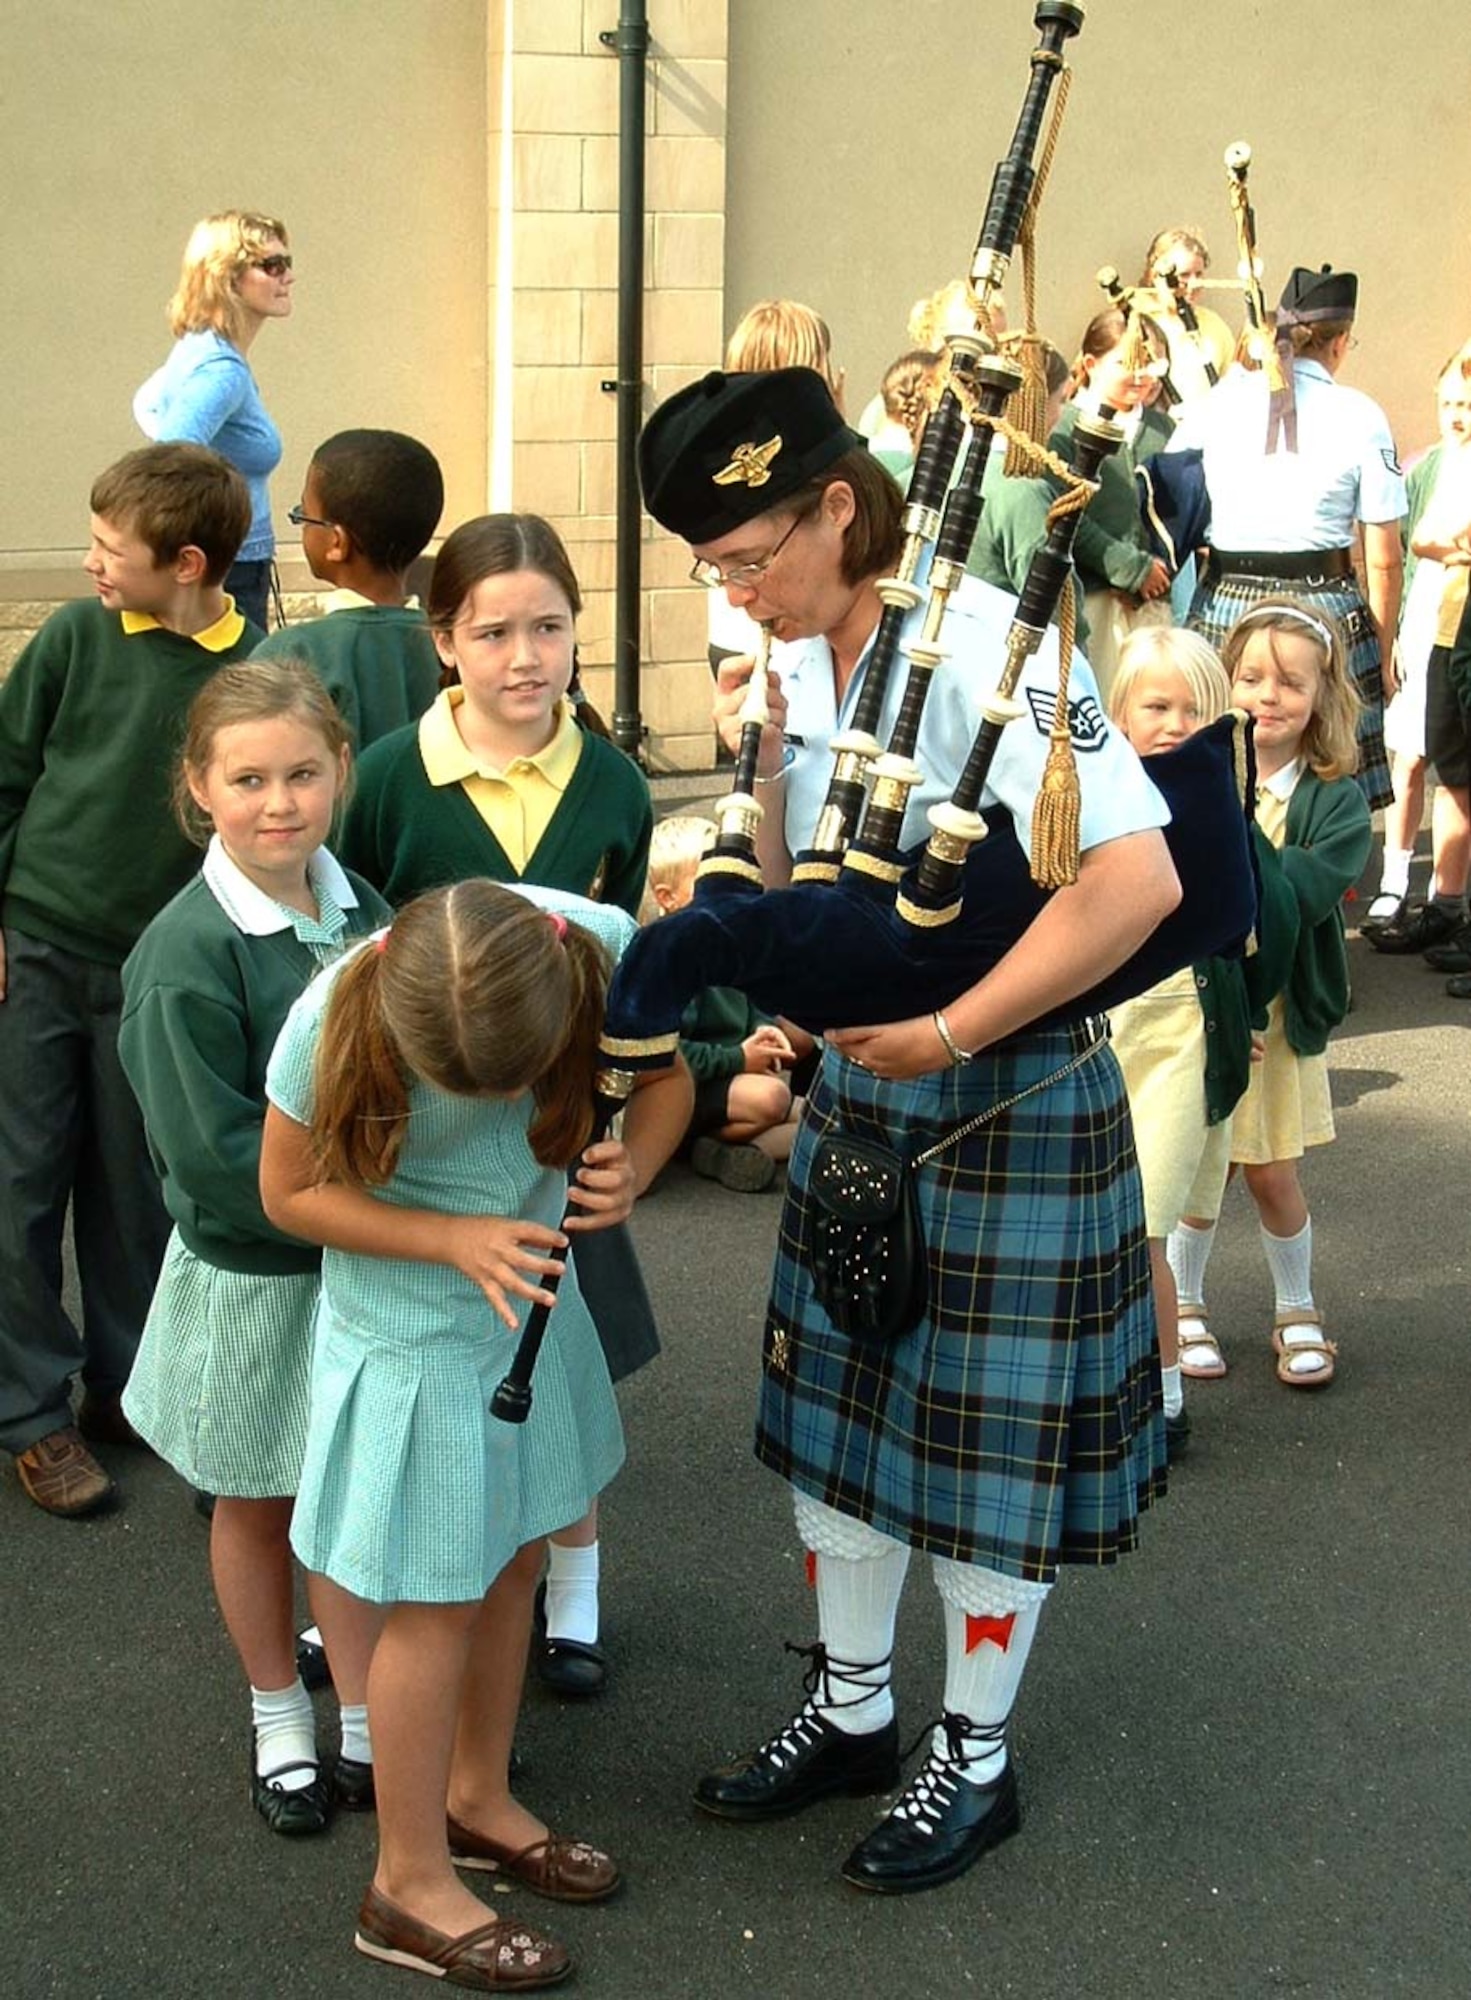 FAIRFORD, United Kingdom -- Staff Sgt. Shane Stanke and school children from the Kempford School in Fairford, U.K., investigate whether playing the bagpipes with multiple people is easier than trying to do it alone. The U.S. Air Force Reserve Pipe Band performed for school children at seven different schools surrounding RAF Fairford. (U.S. Air Force photo/Staff Sgt. Eric Frank)